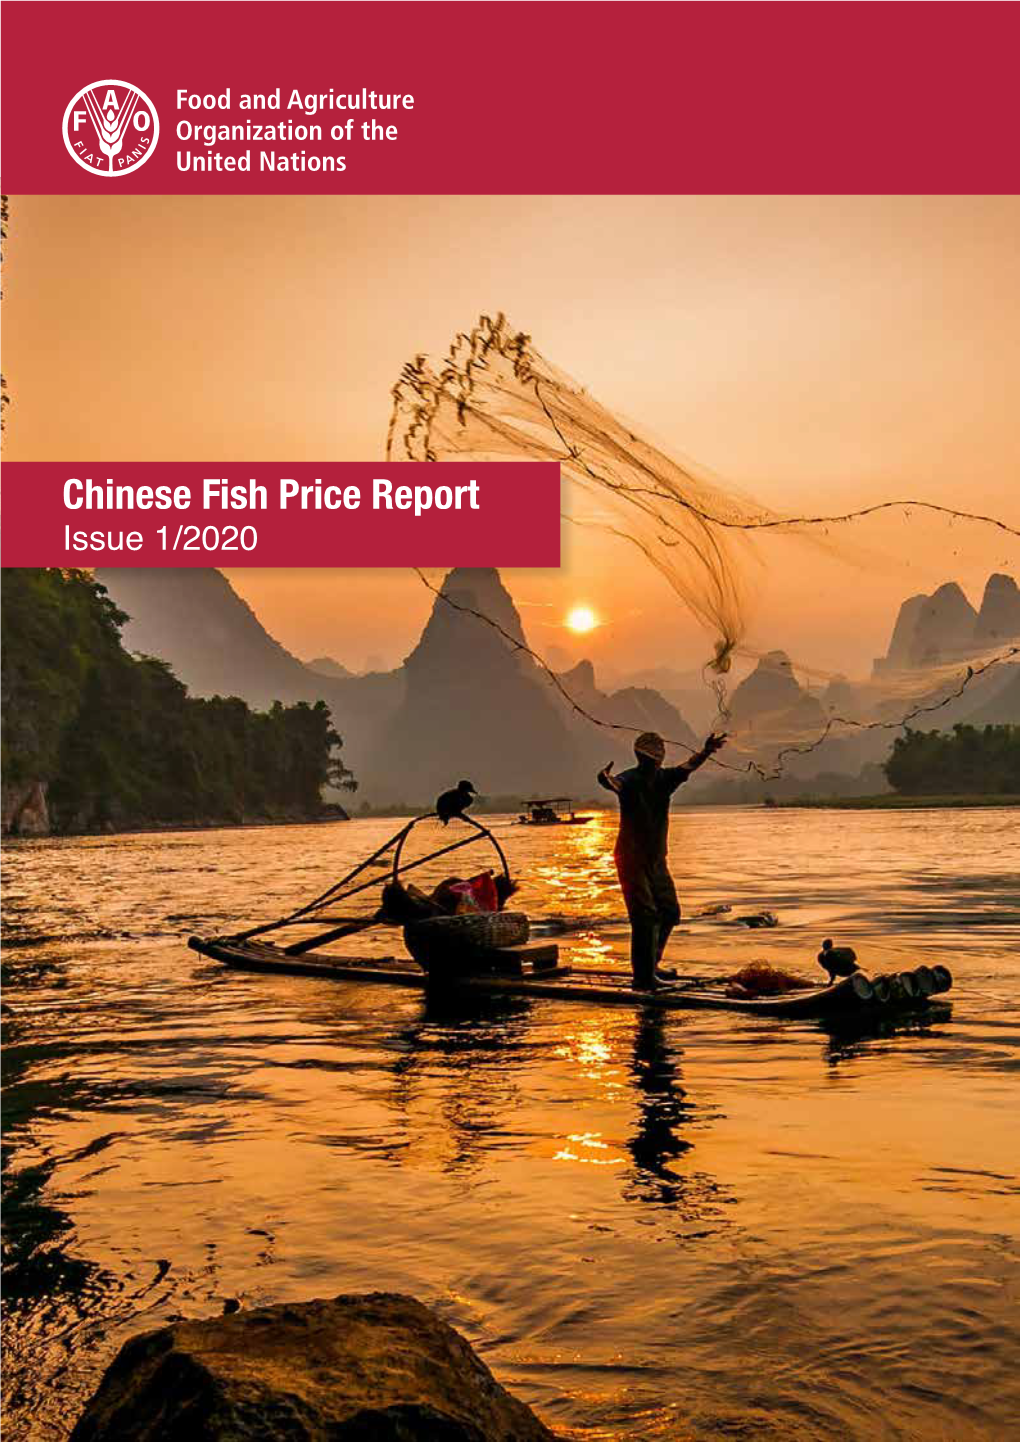 Chinese Fish Price Report Issue 1/2020 Issue 1/2020 Chinese Fish Price Report